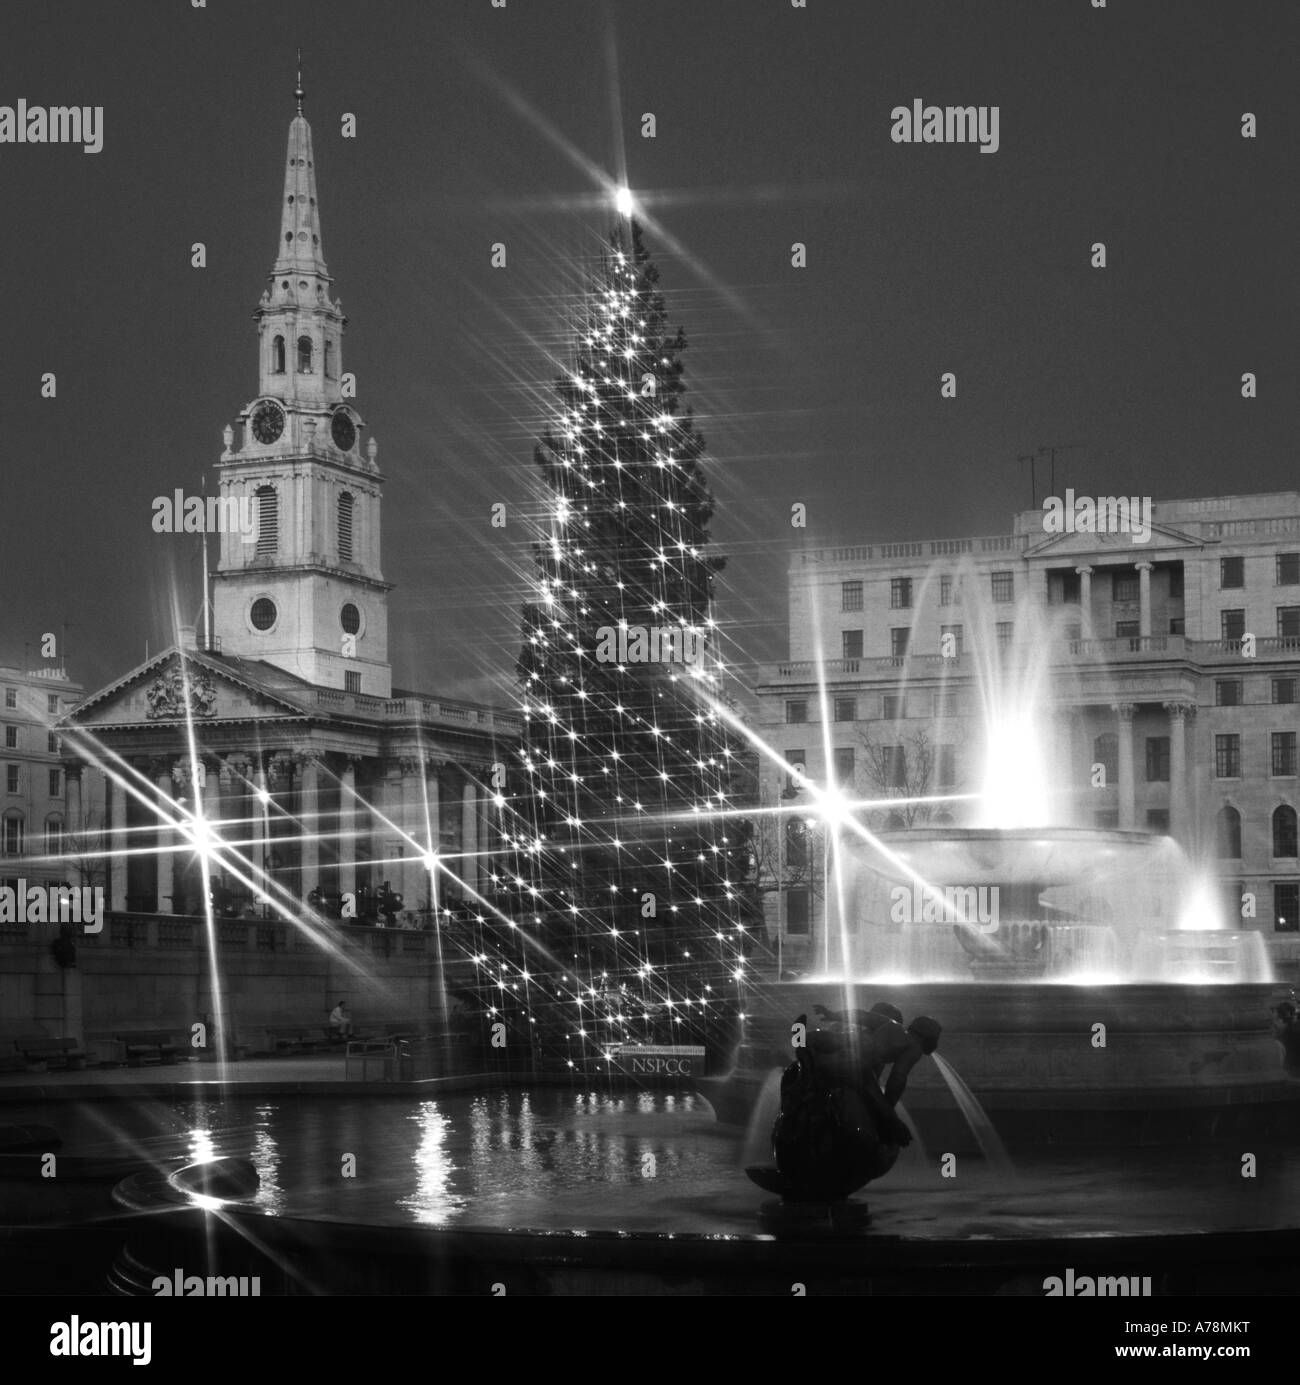 Water feature in Trafalgar Square London England UK & Christmas tree lights with floodlights on fountains & St Martin in the Fields church & spire Stock Photo